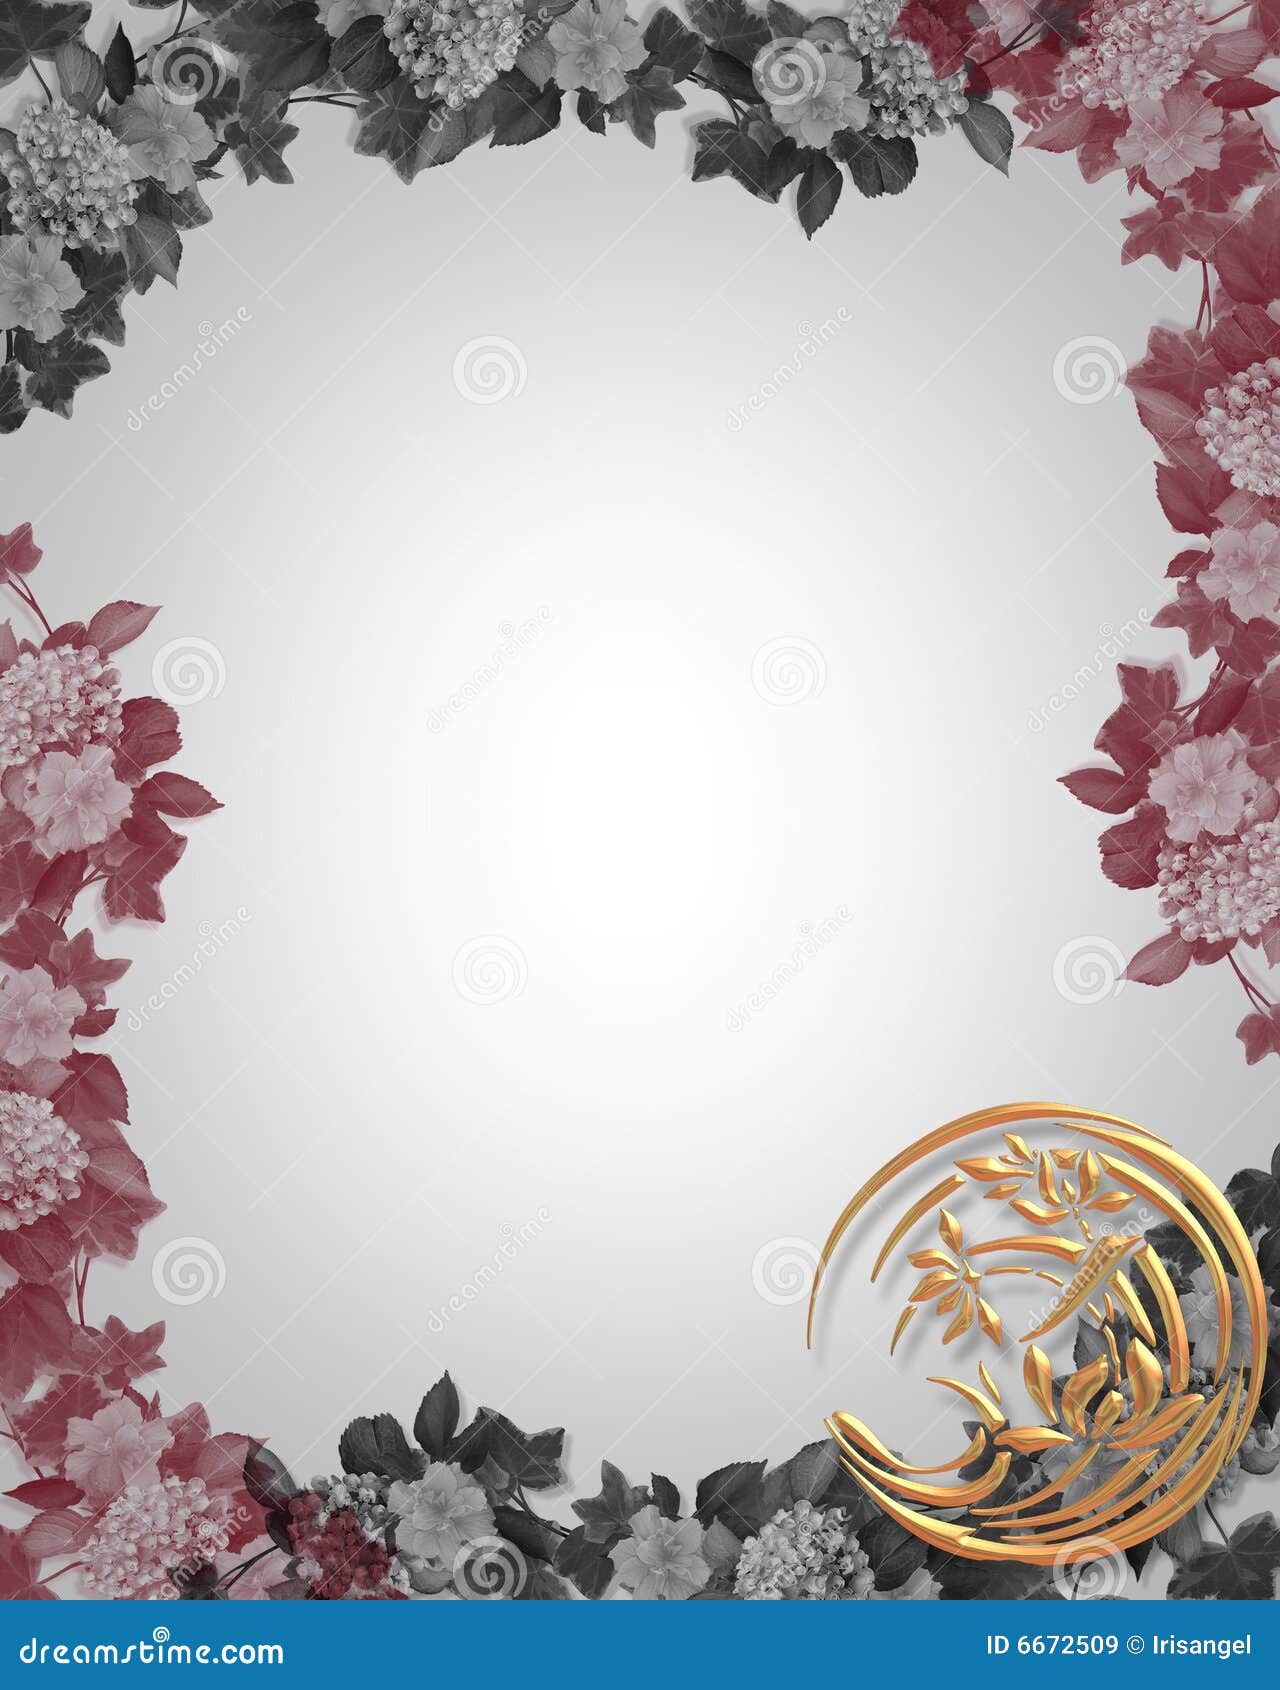 Asian Floral Design Template Royalty Free Stock Images - Image: 6672509